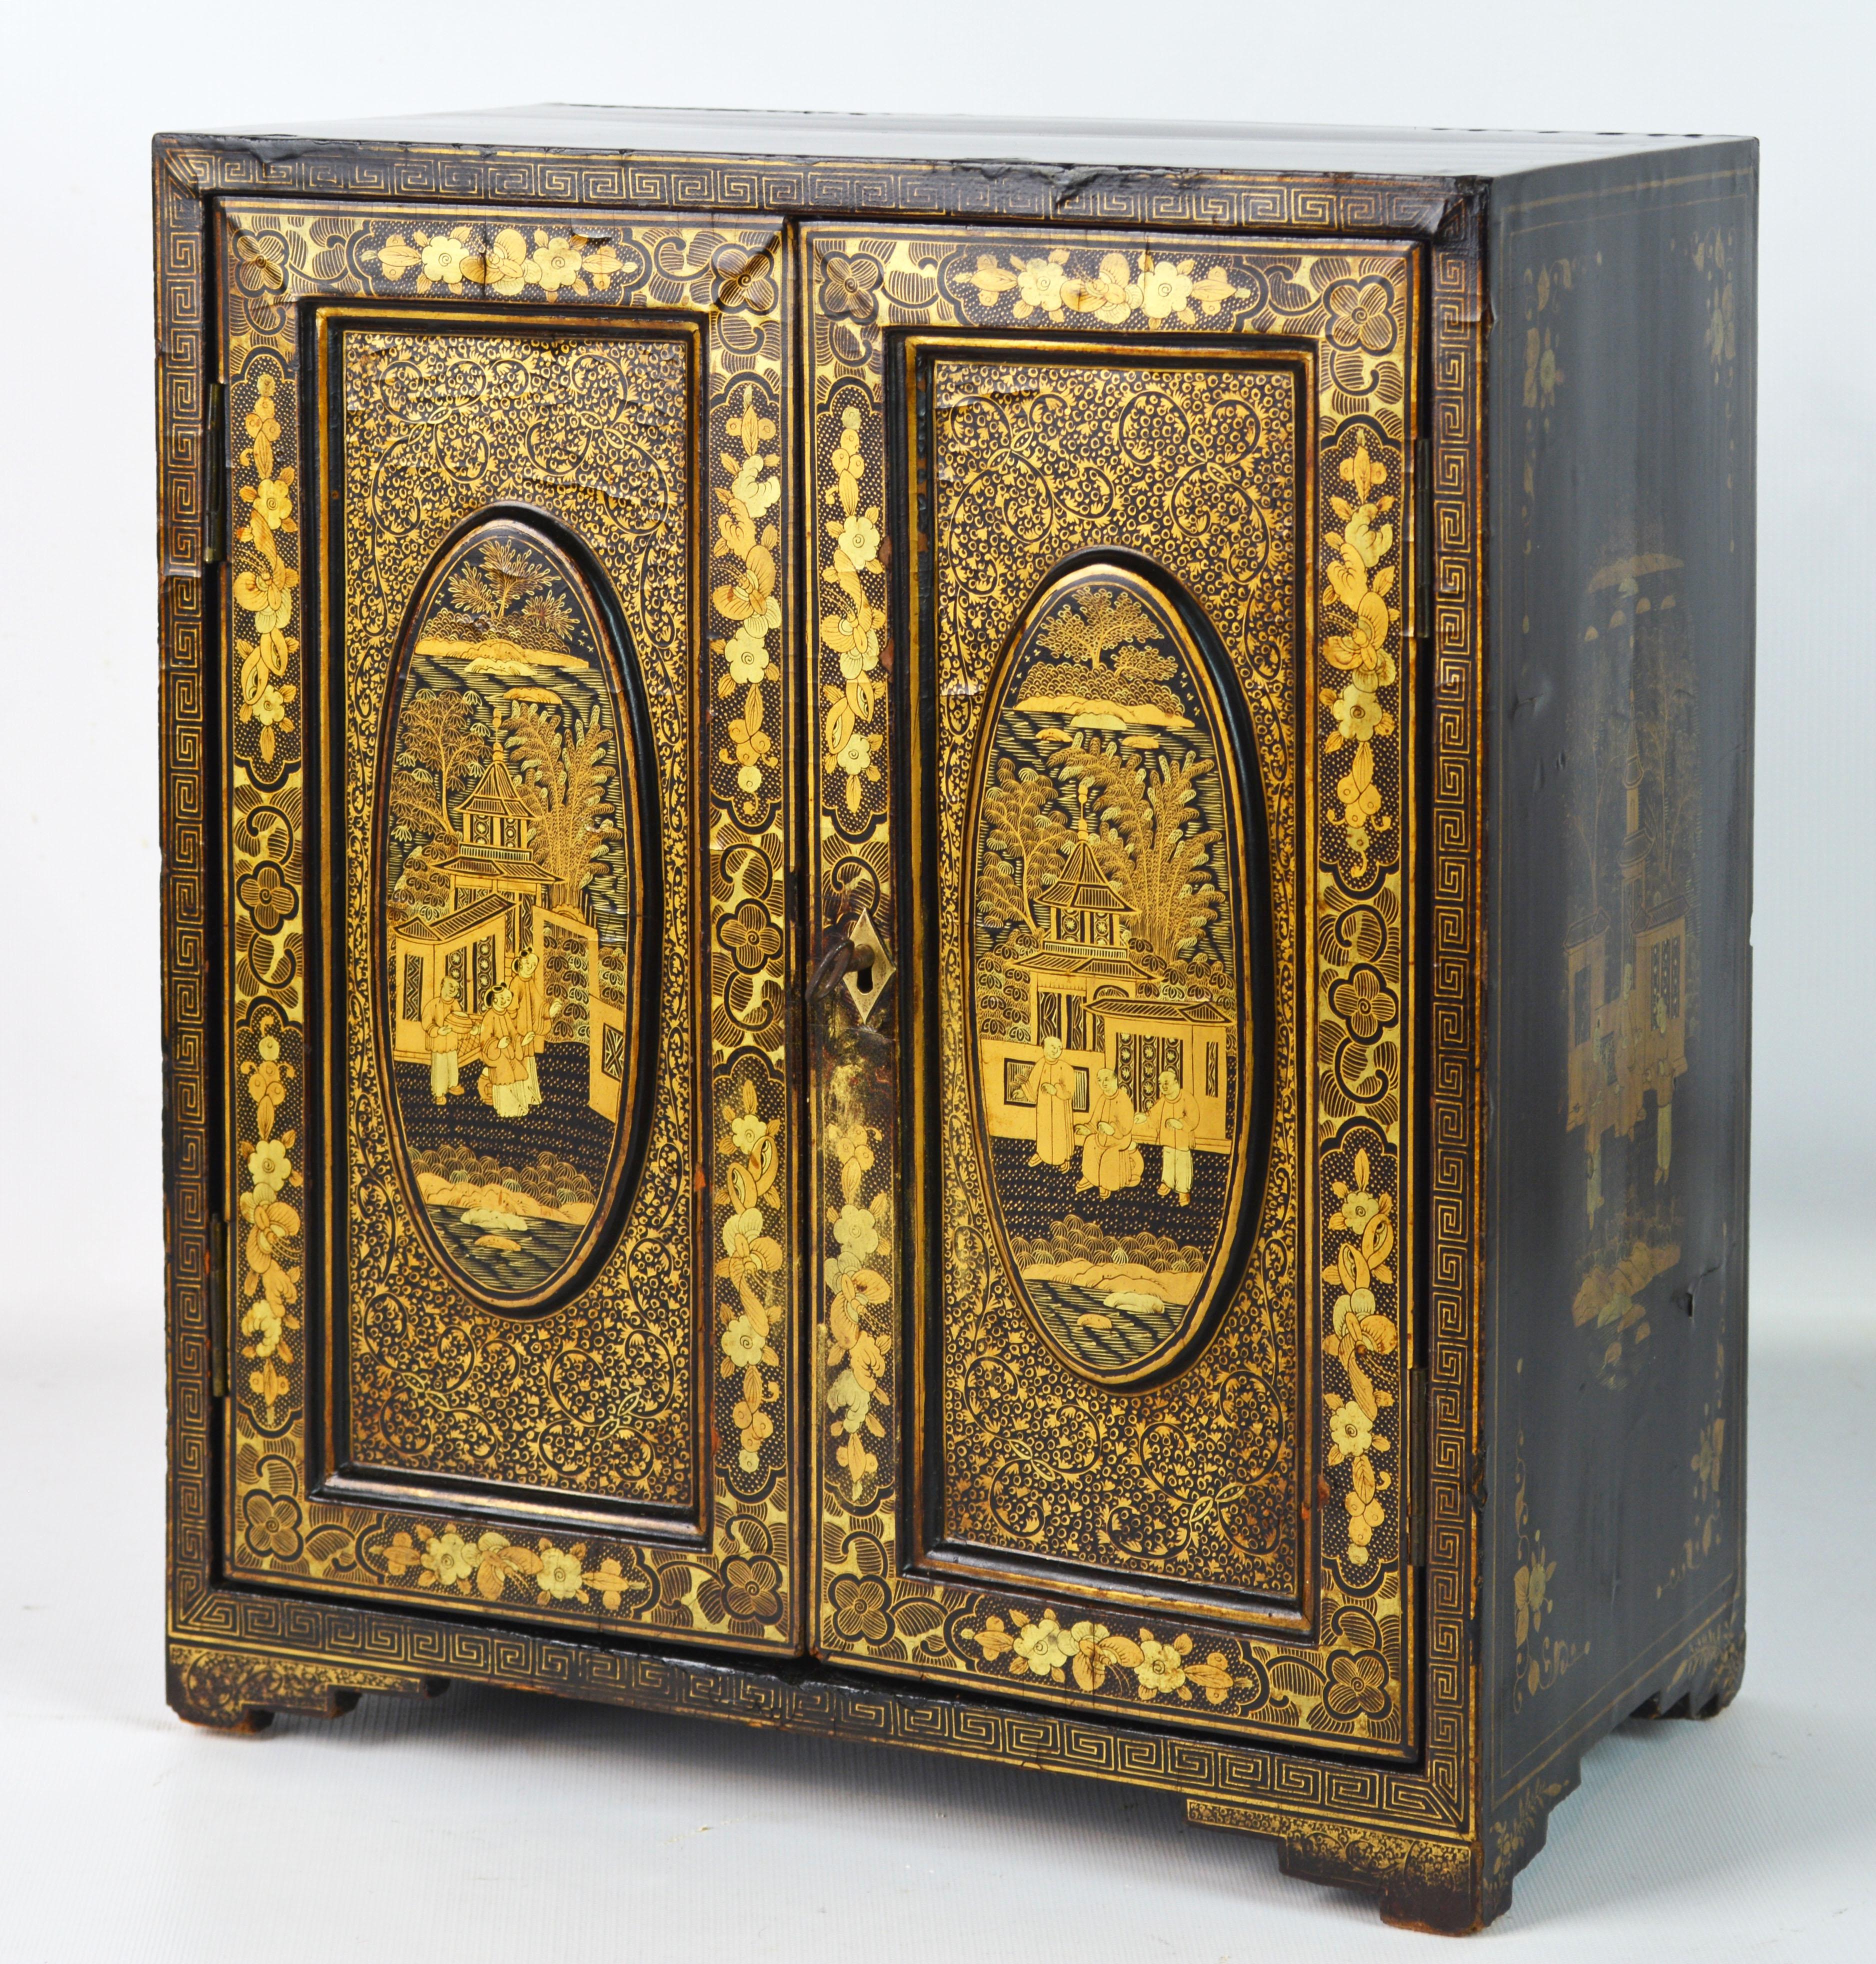 This little Chinese gem features two richly gilt decorated doors that open up to an interior fitted with 5 likewise decorated drawers and bone knobs. Resting on a carved gilt decorated Ming style base the cabinet features hand painted gilt